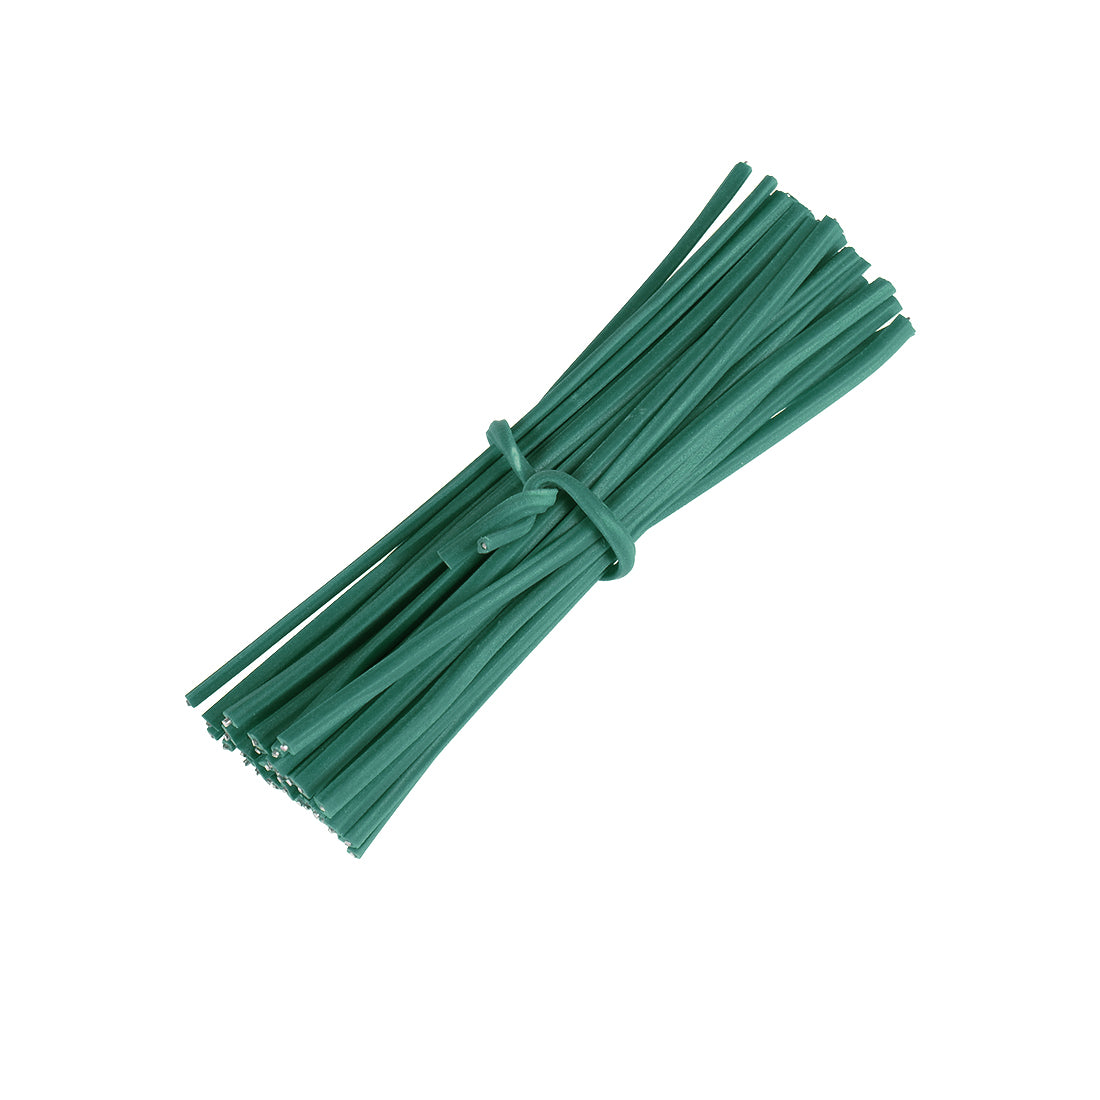 uxcell Uxcell 3 Inches Plastic Twist Ties Reusable Cable Cord Wire Ties Green 500pcs